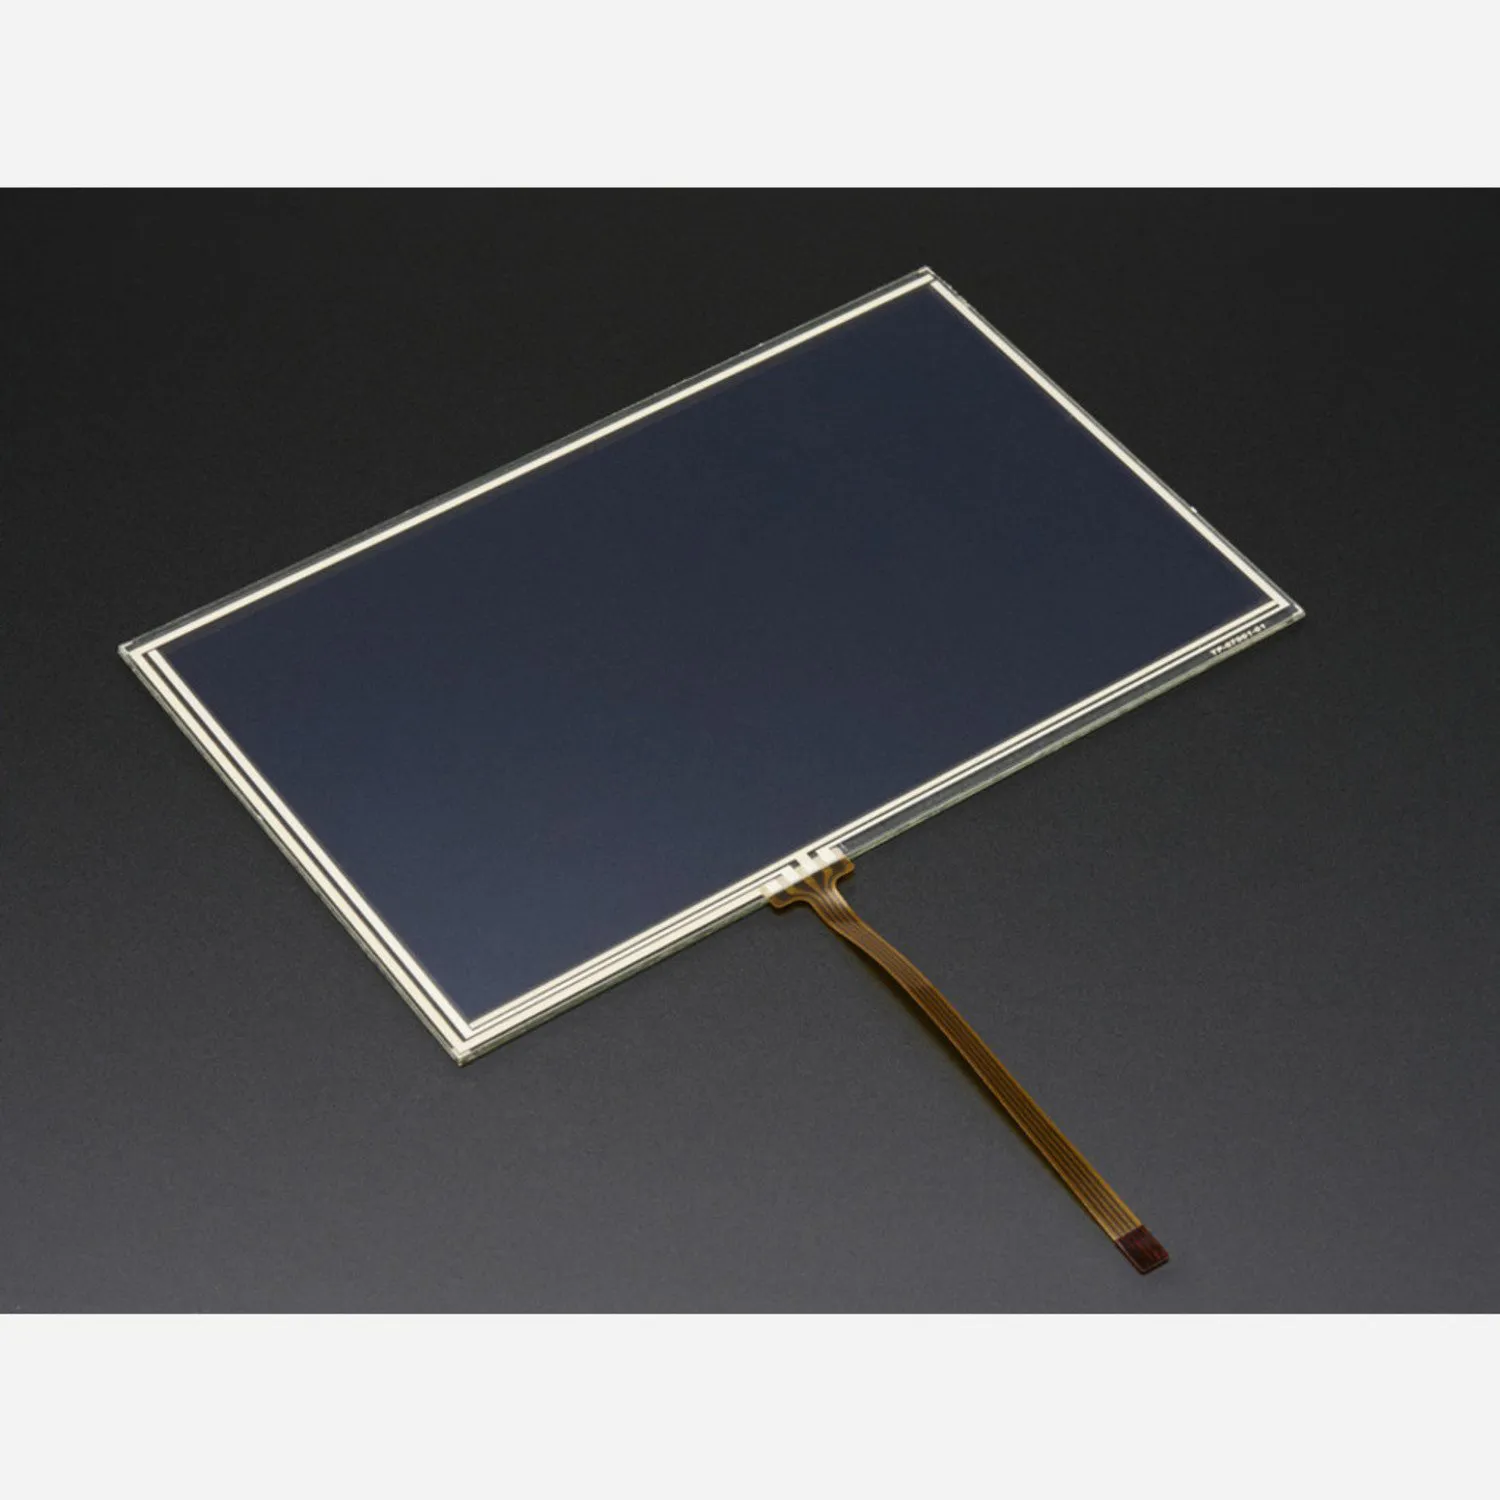 Photo of Resistive Touchscreen Overlay - 7 diag. 165mm x 105mm - 4 Wire